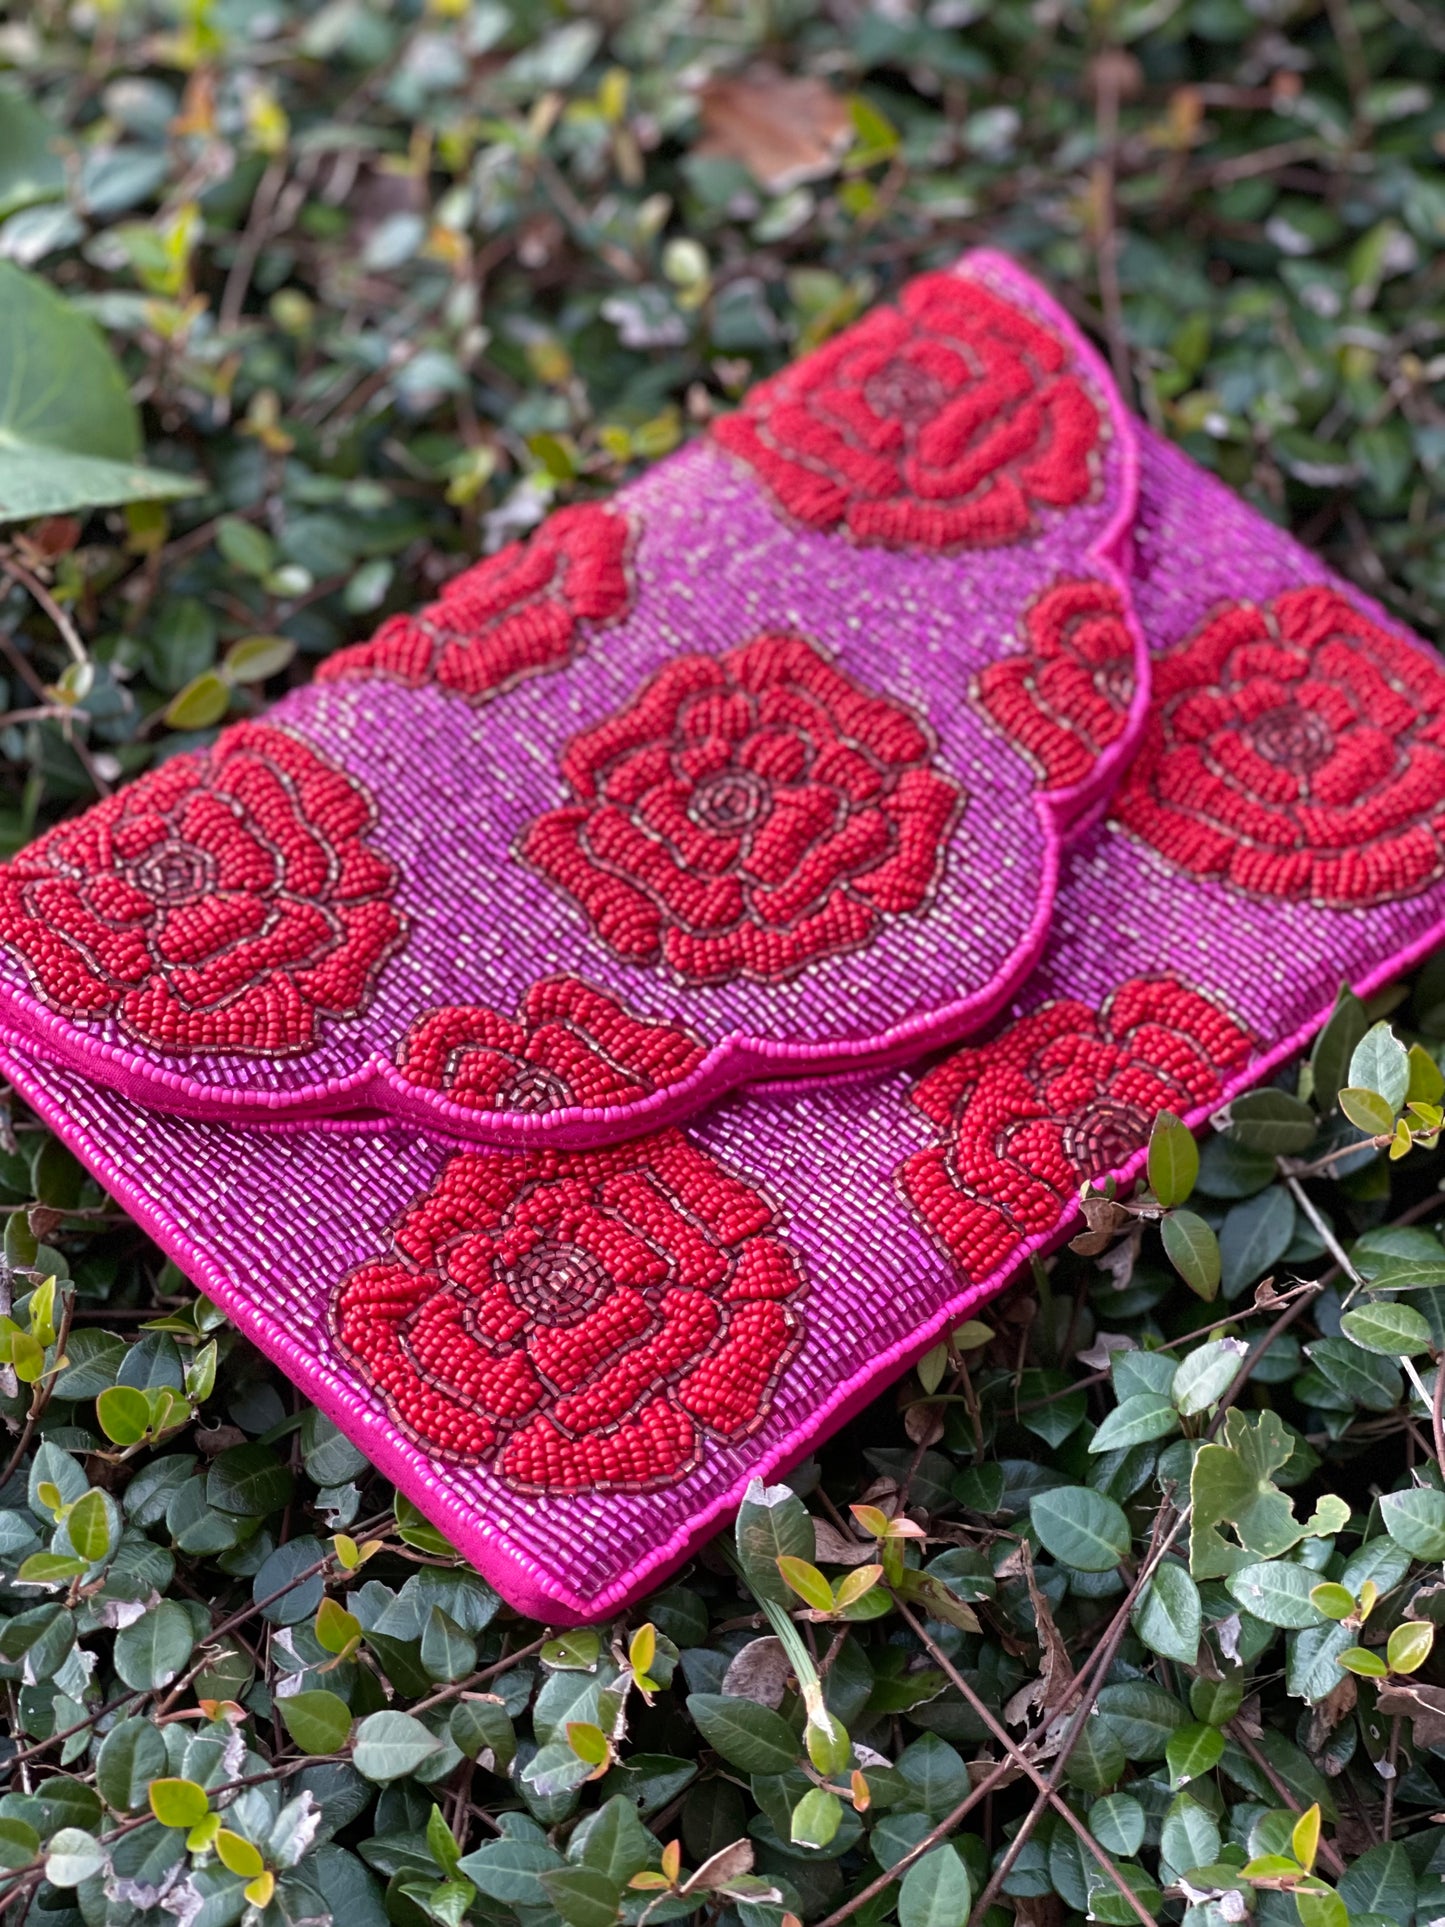 Floral Beaded Clutch Purse